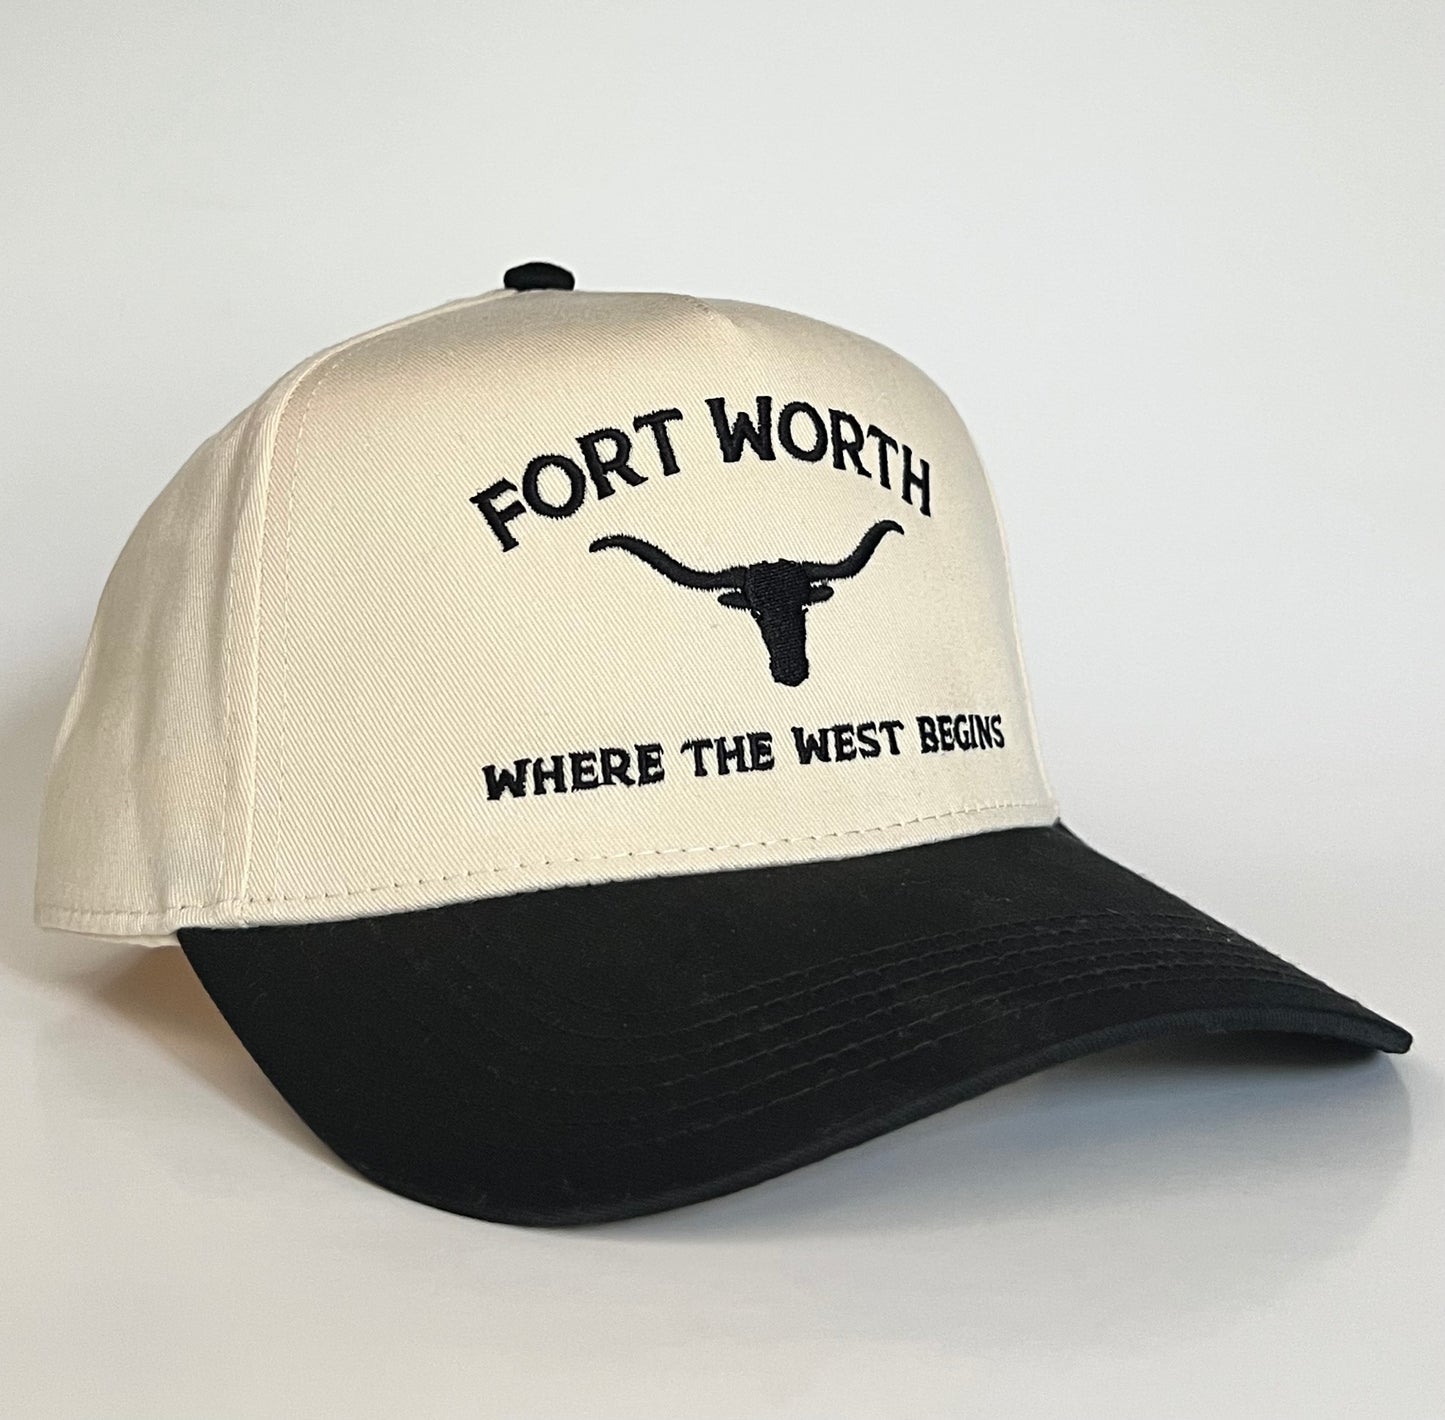 Fort Worth, Where The West Begins - Black/Natural